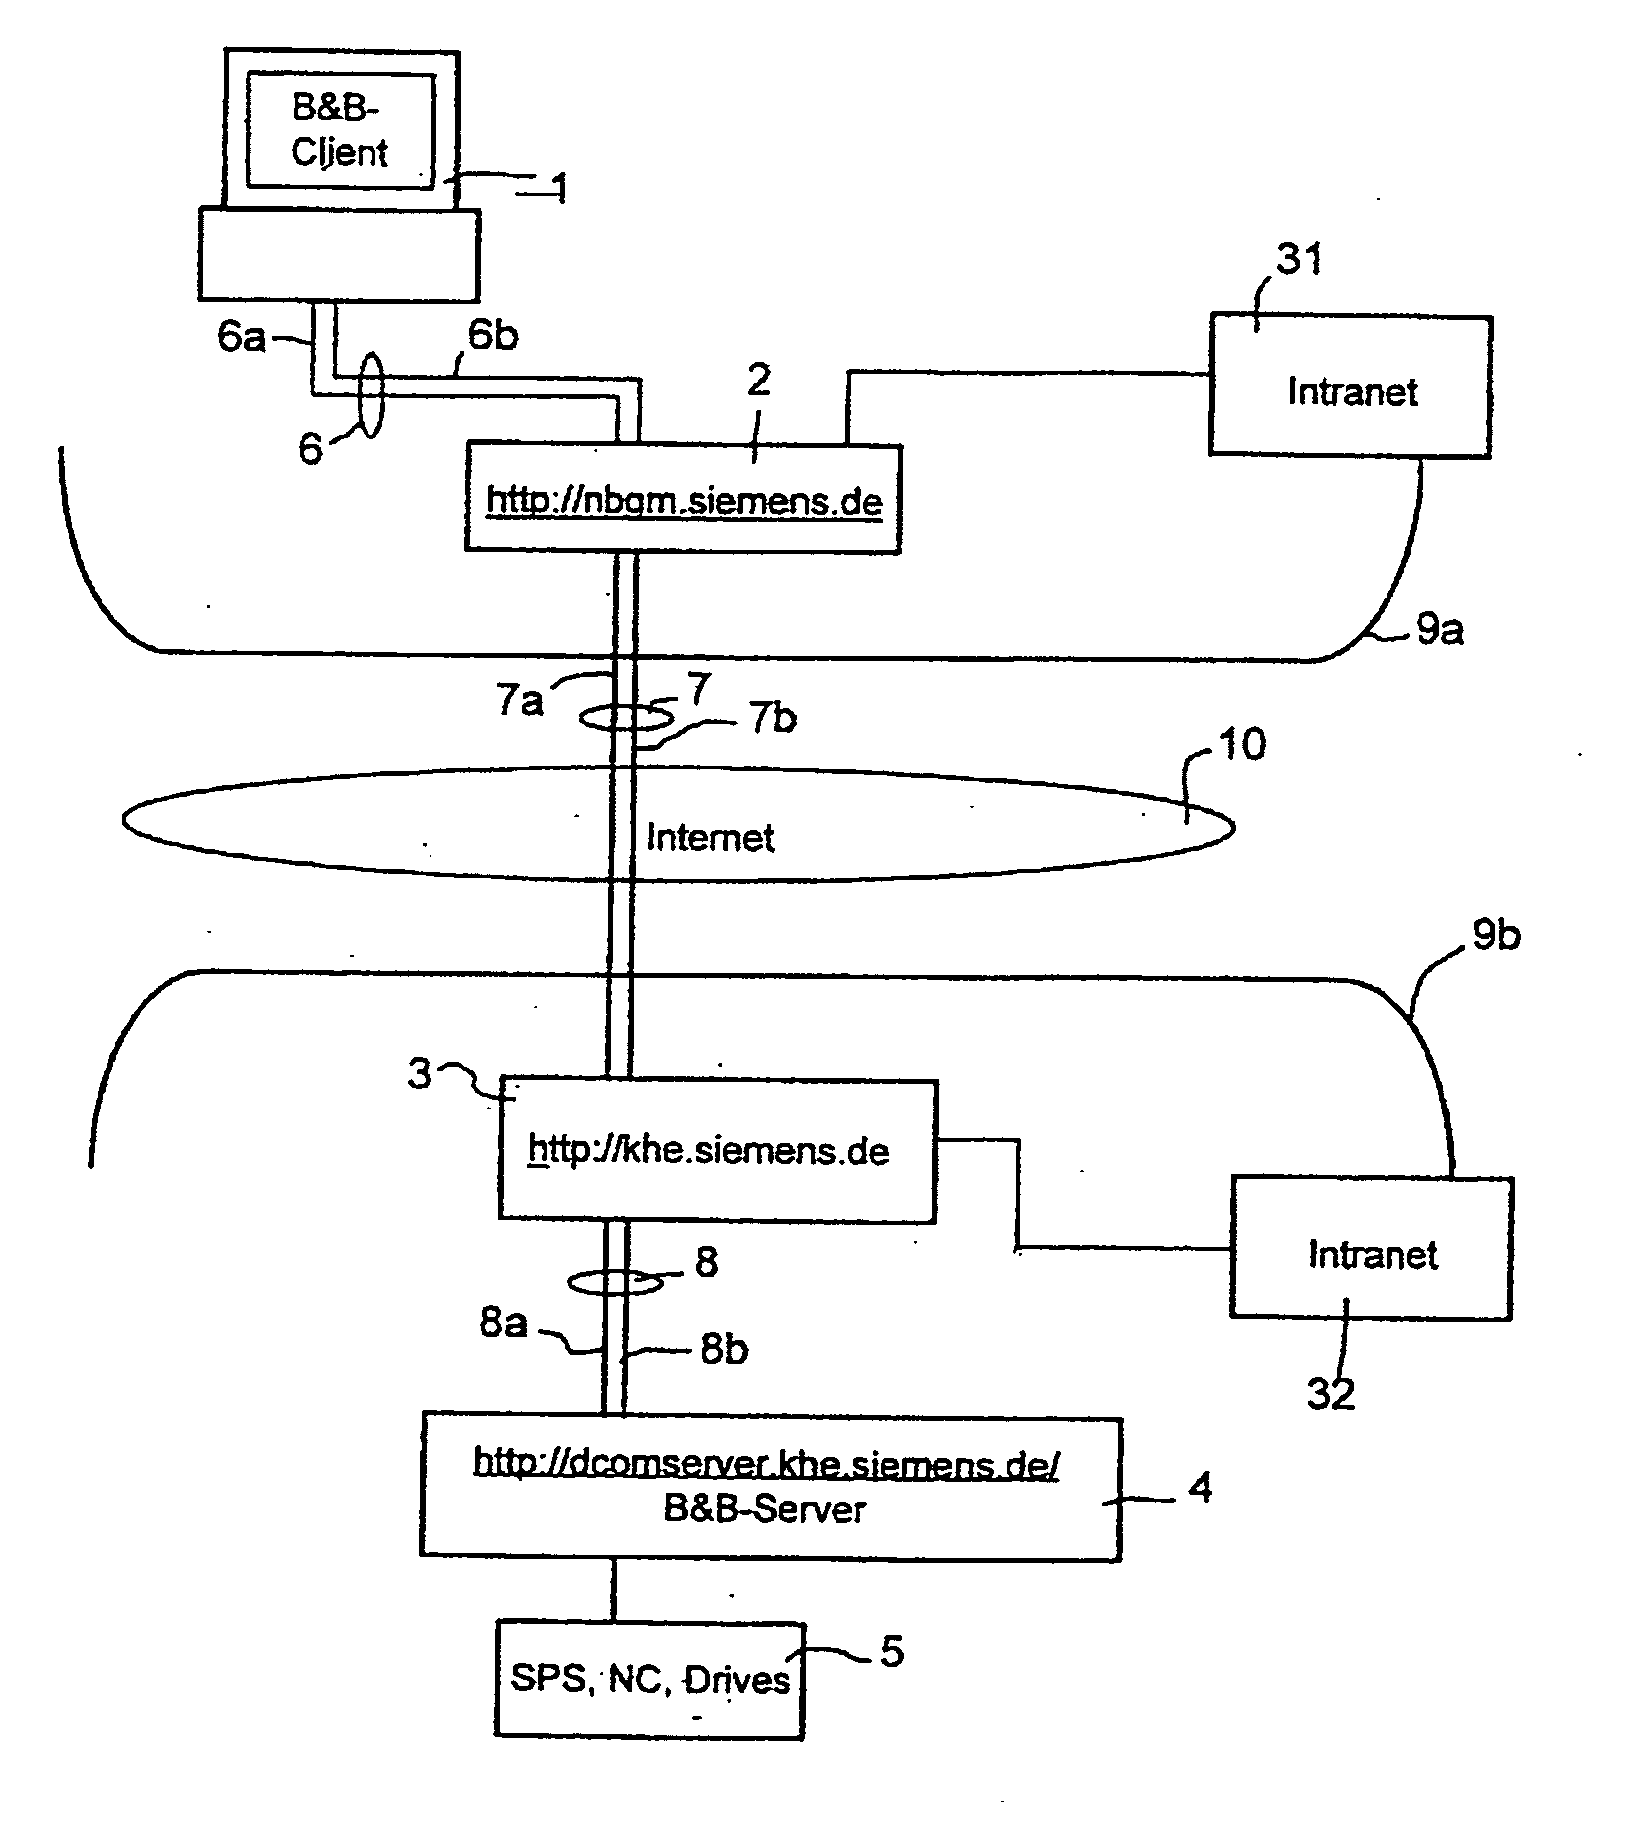 System and method for the operator control and for the monitoring of an automation system over the internet using an asymmetric internet connection